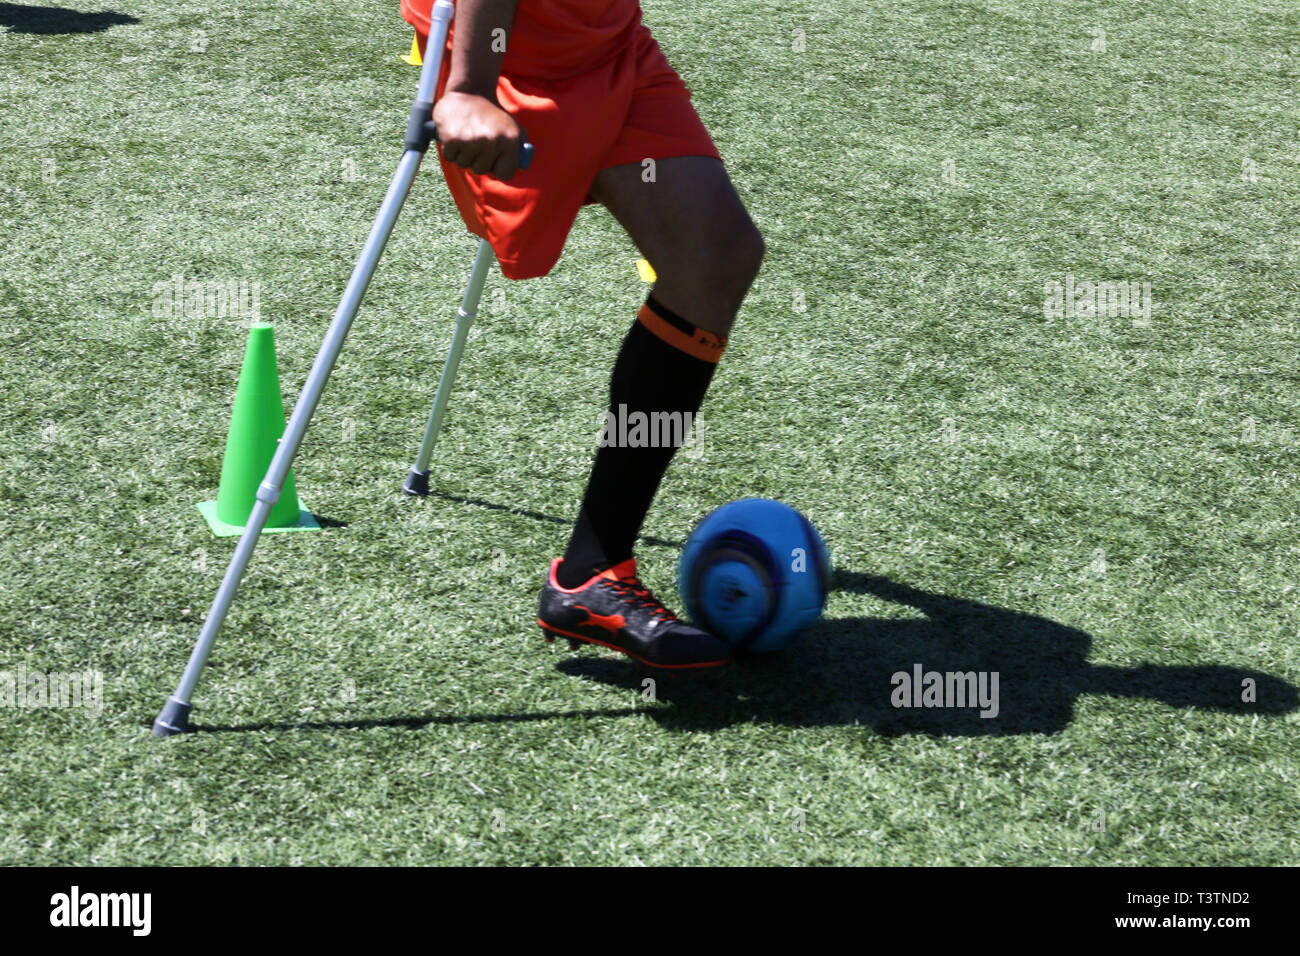 Preparation of the football match for people with disabilities Amputation, which will be held next Saturday in Gaza City, on April 11, 2019. for the f Stock Photo